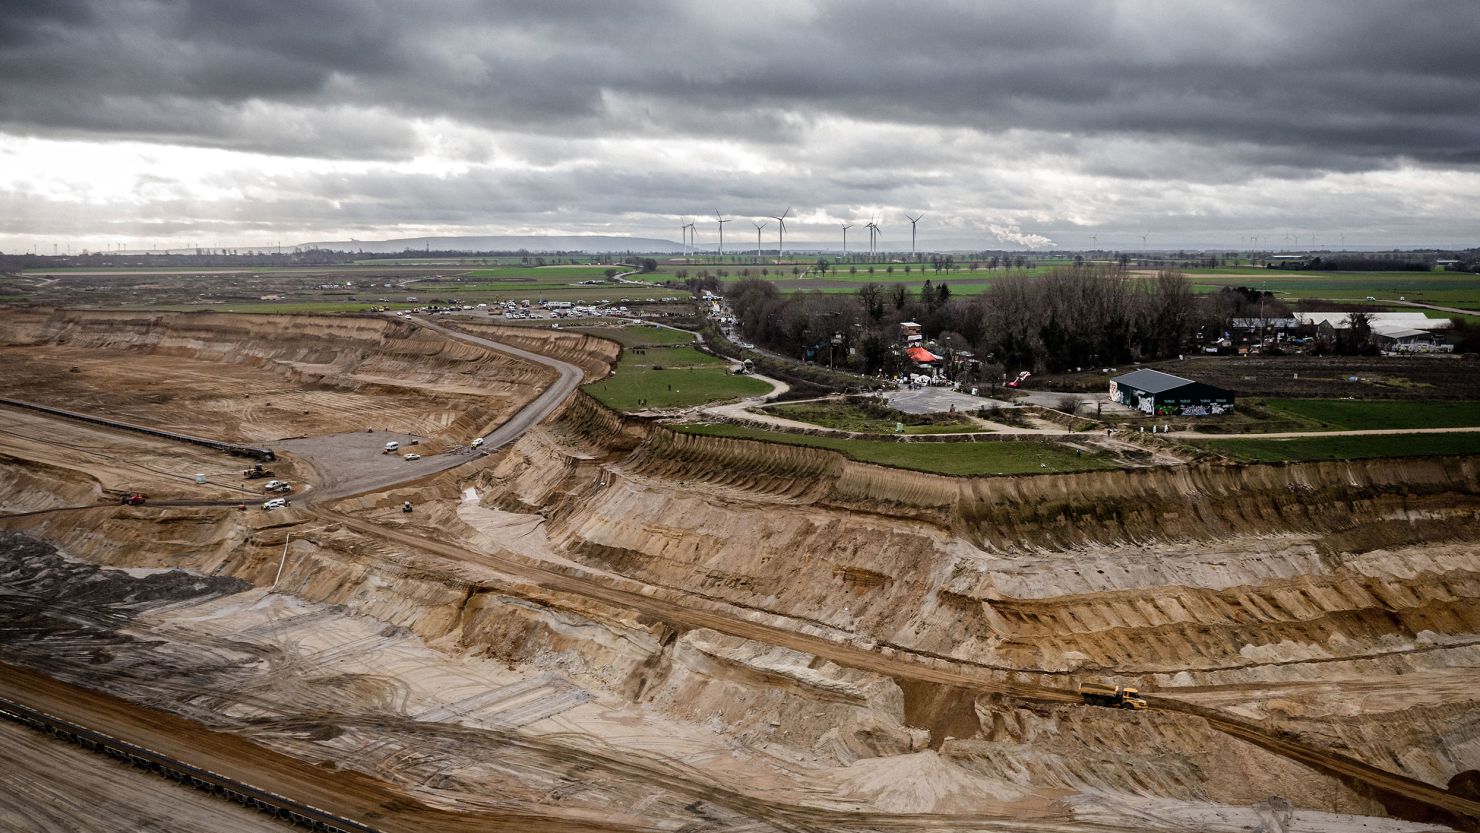 plans a stop village destroy to mine. this to coal it for | Thousands gathering CNN Germany are